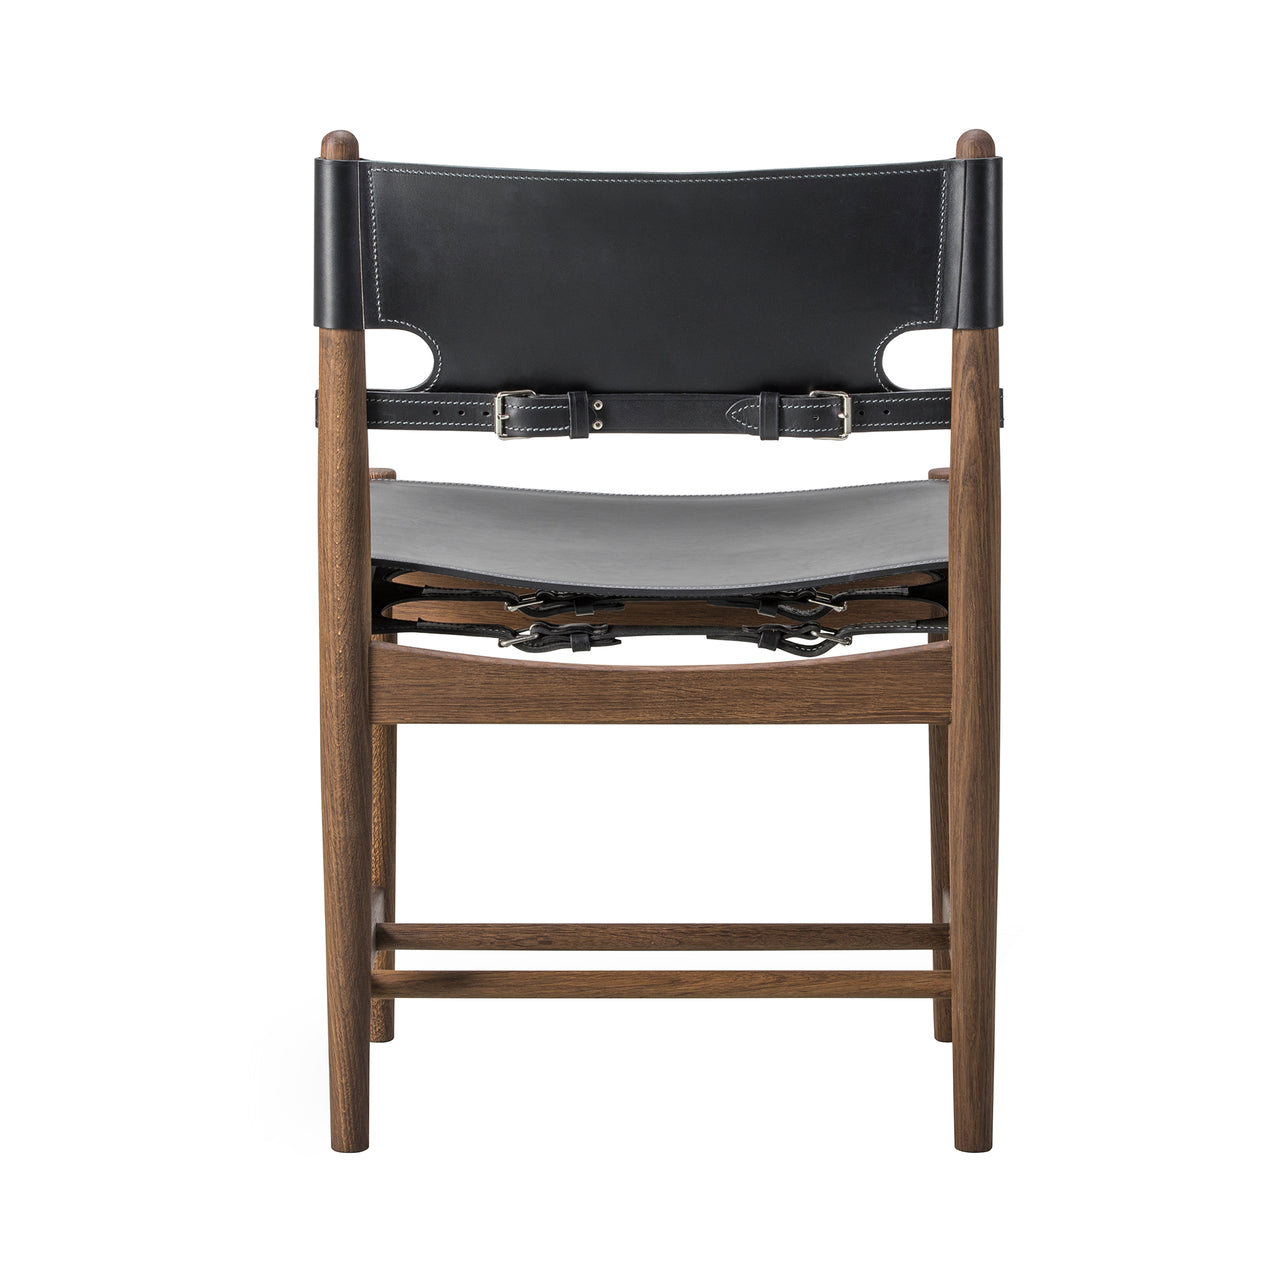 The Spanish Dining Chair: Without Arm + Smoked Oiled Oak + Black